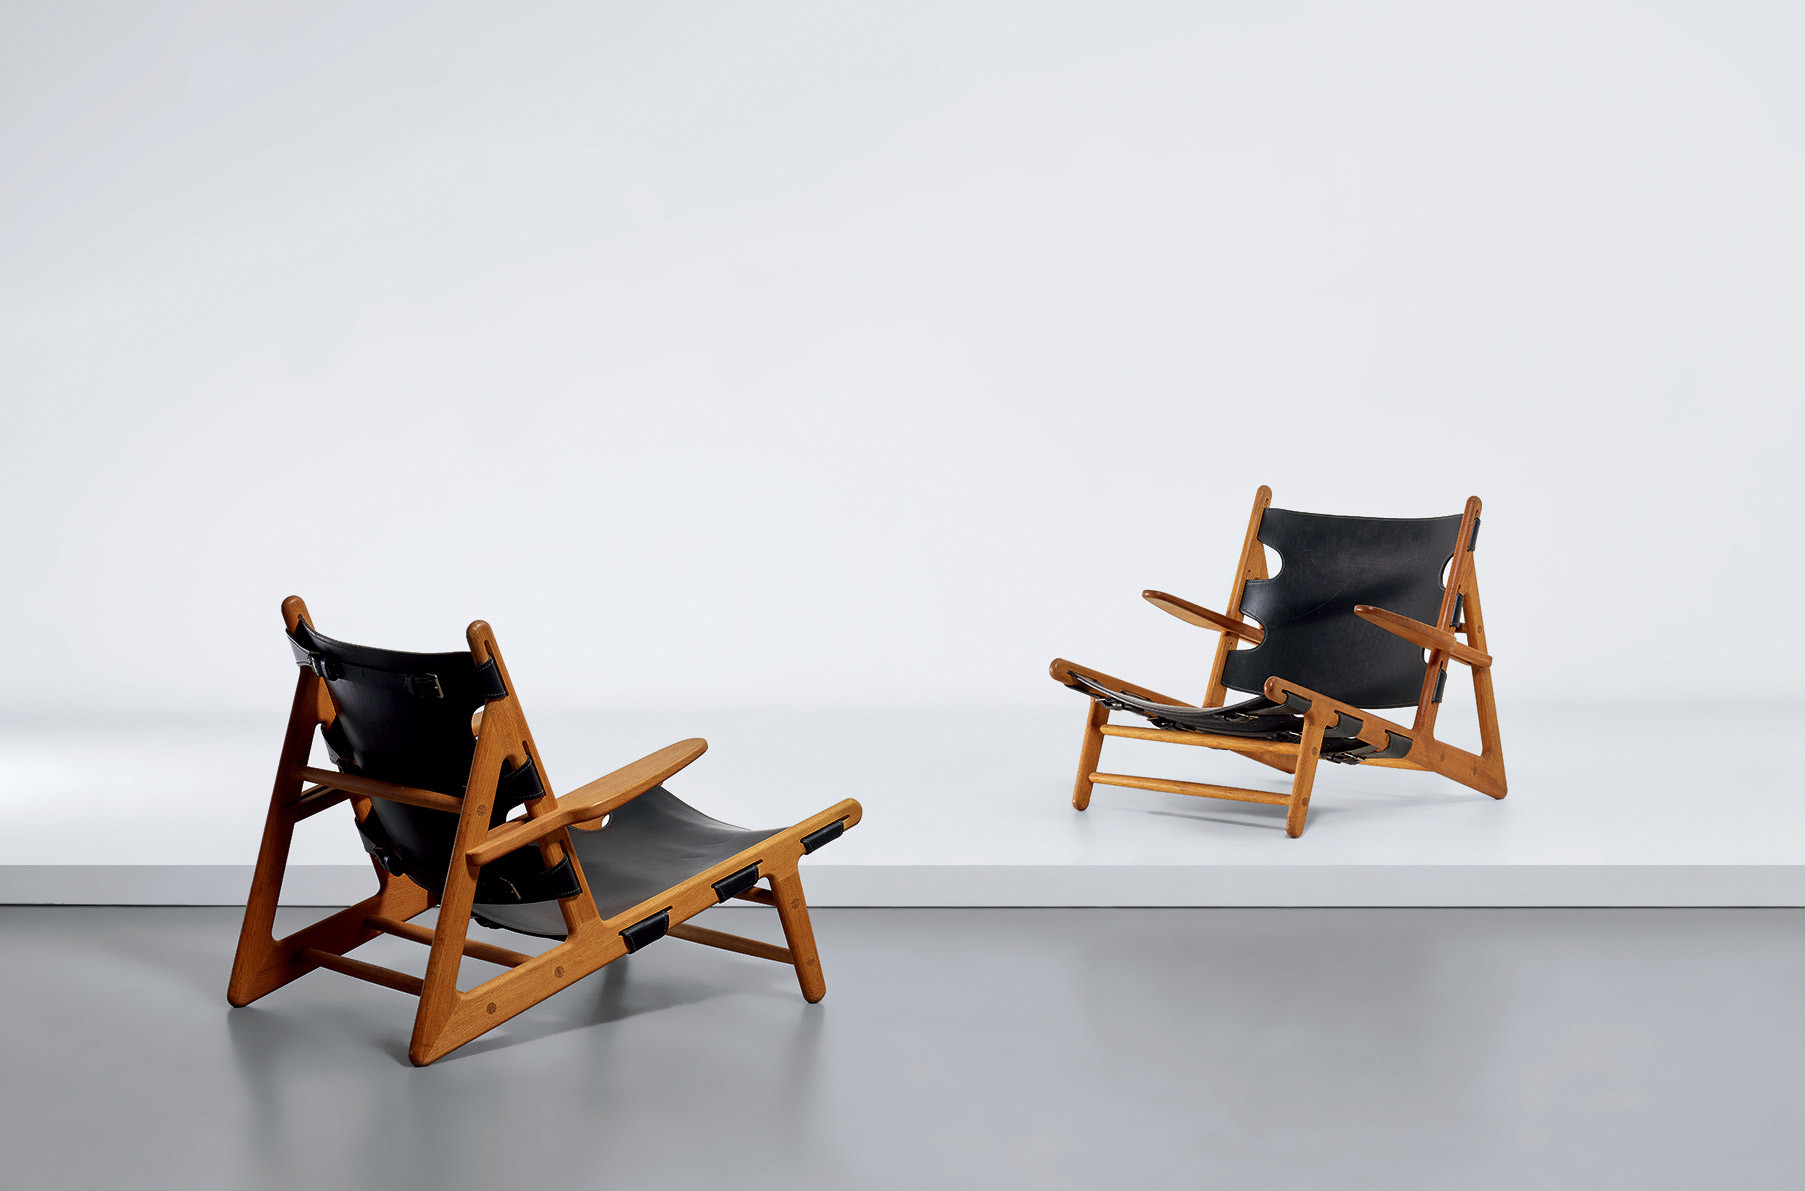 Pair of ‘Hunting’ chairs, model no. 2229